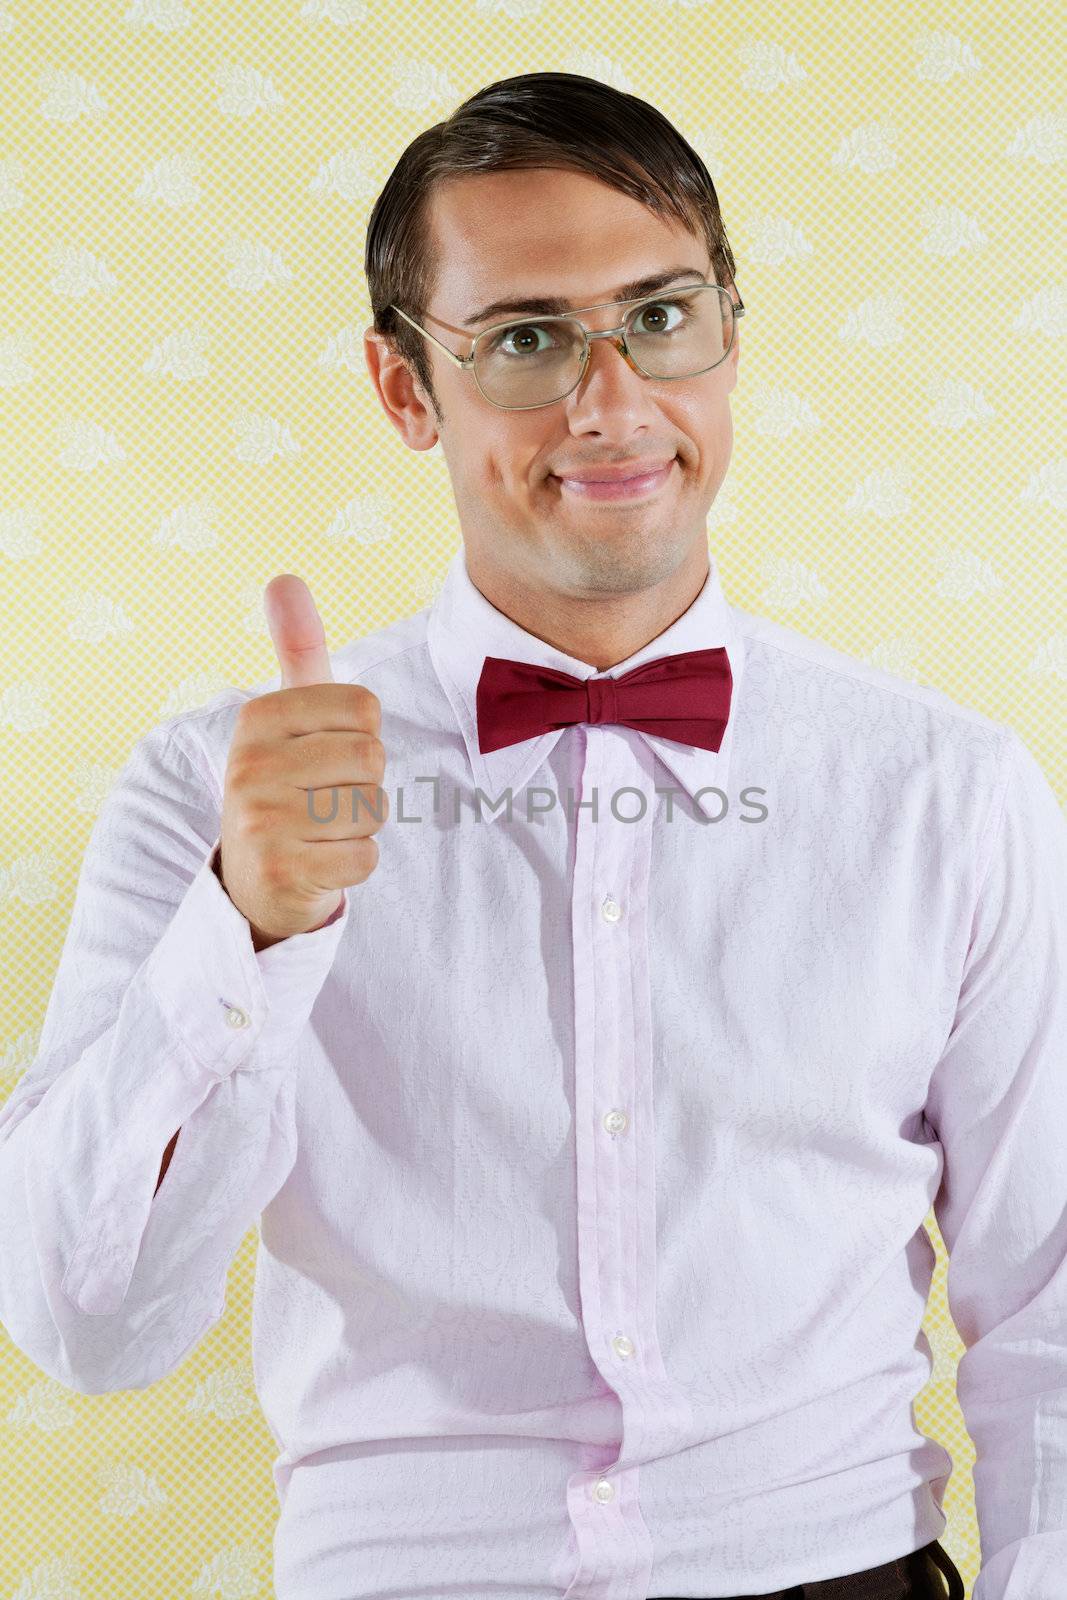 Portrait of young male geek gesturing thumbs up over yellow textured background